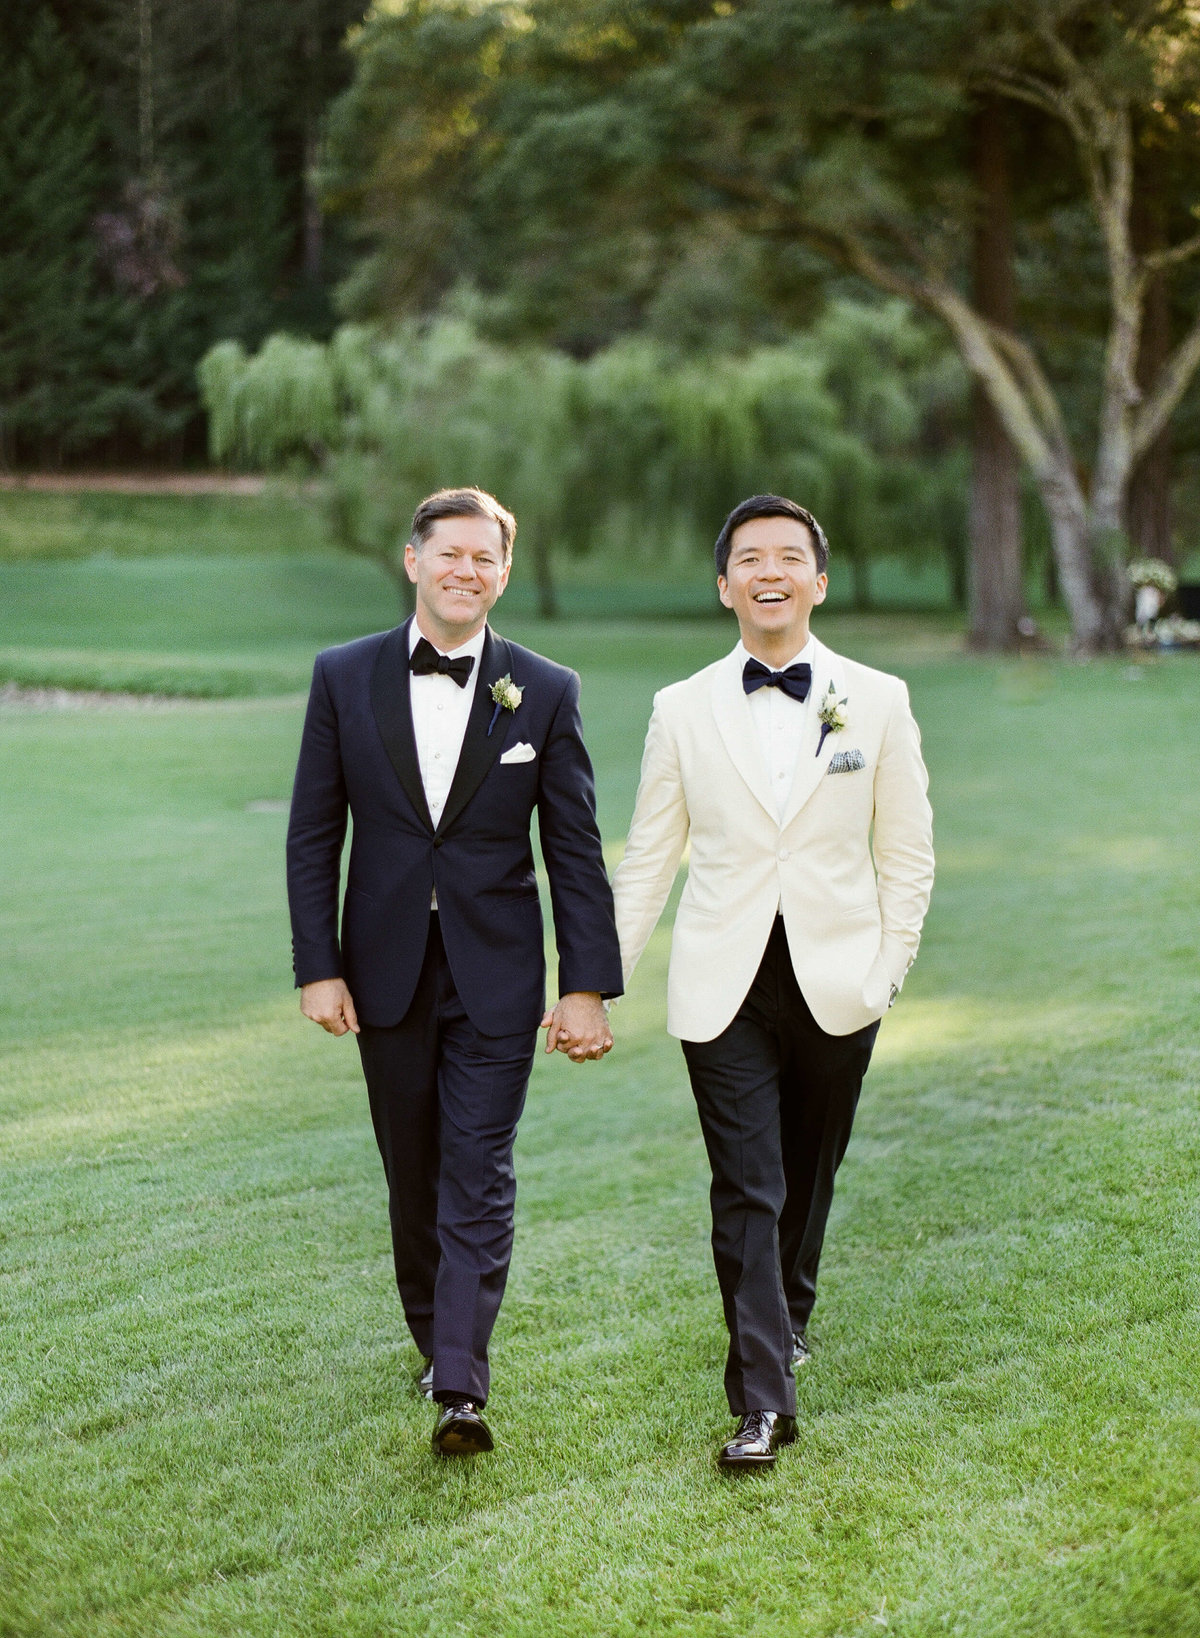 21-KTMerry-weddings-two-grooms-portrait-NapaValley